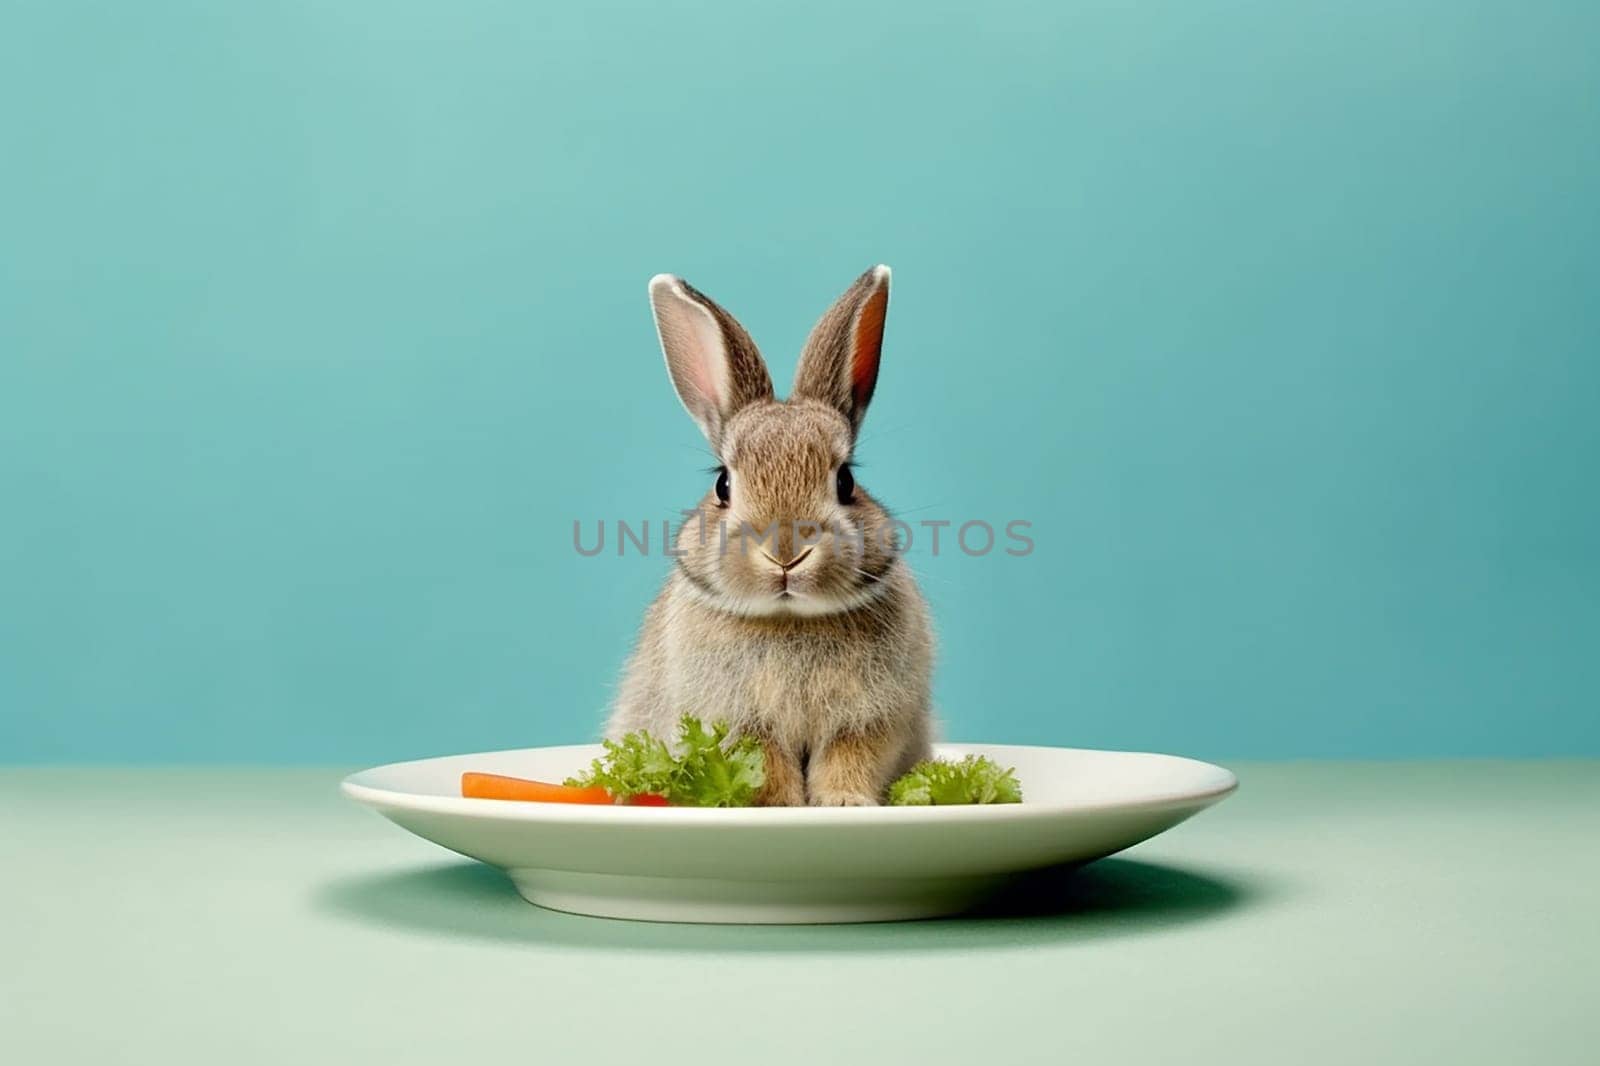 A little cute and adorable small rabbit on a plate,, baby bunny photo, vegetarian or vegan concept, neutral background by Hype2art